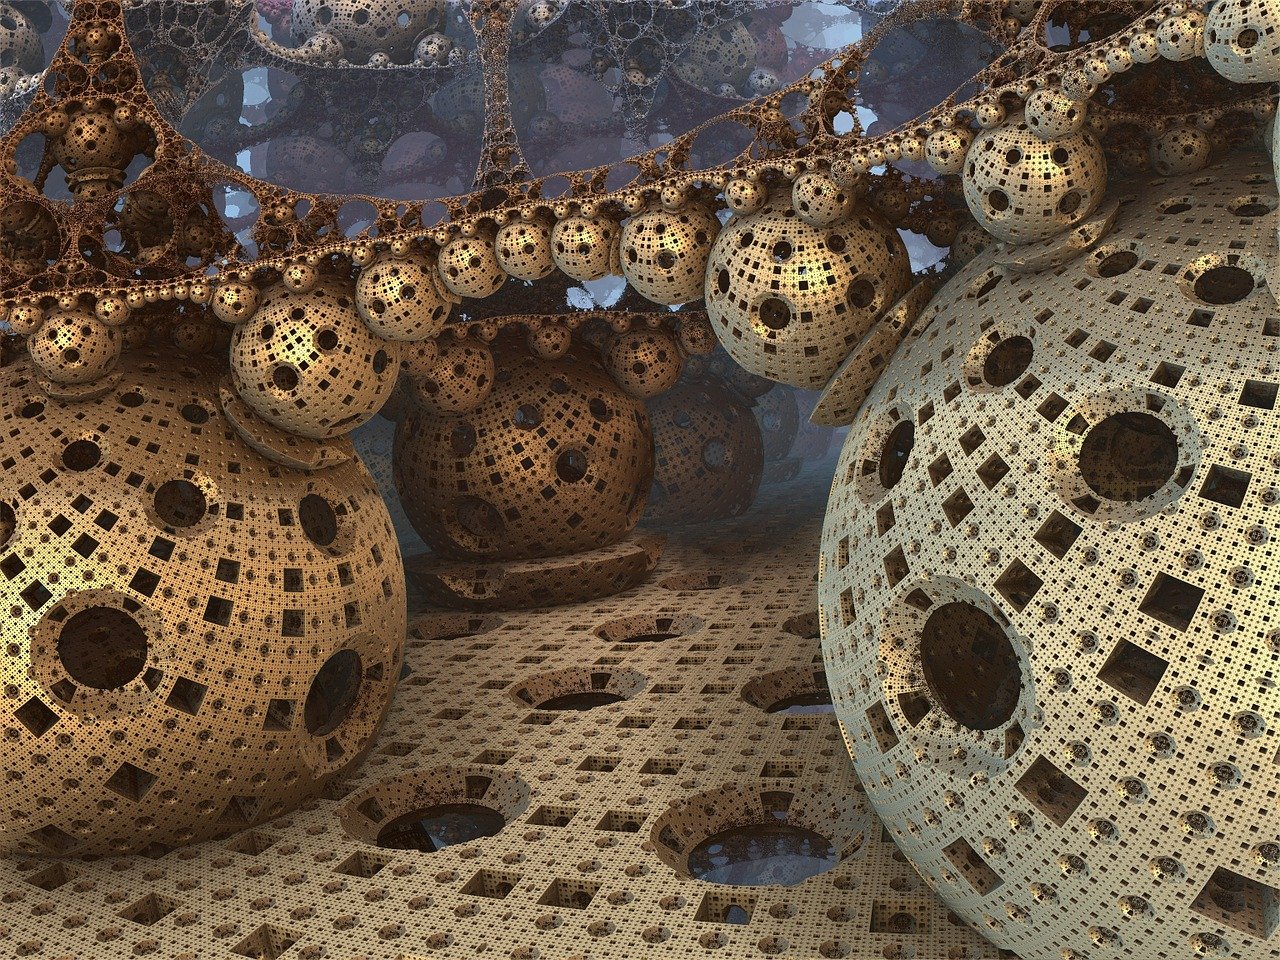 A picture of complex-looking balls